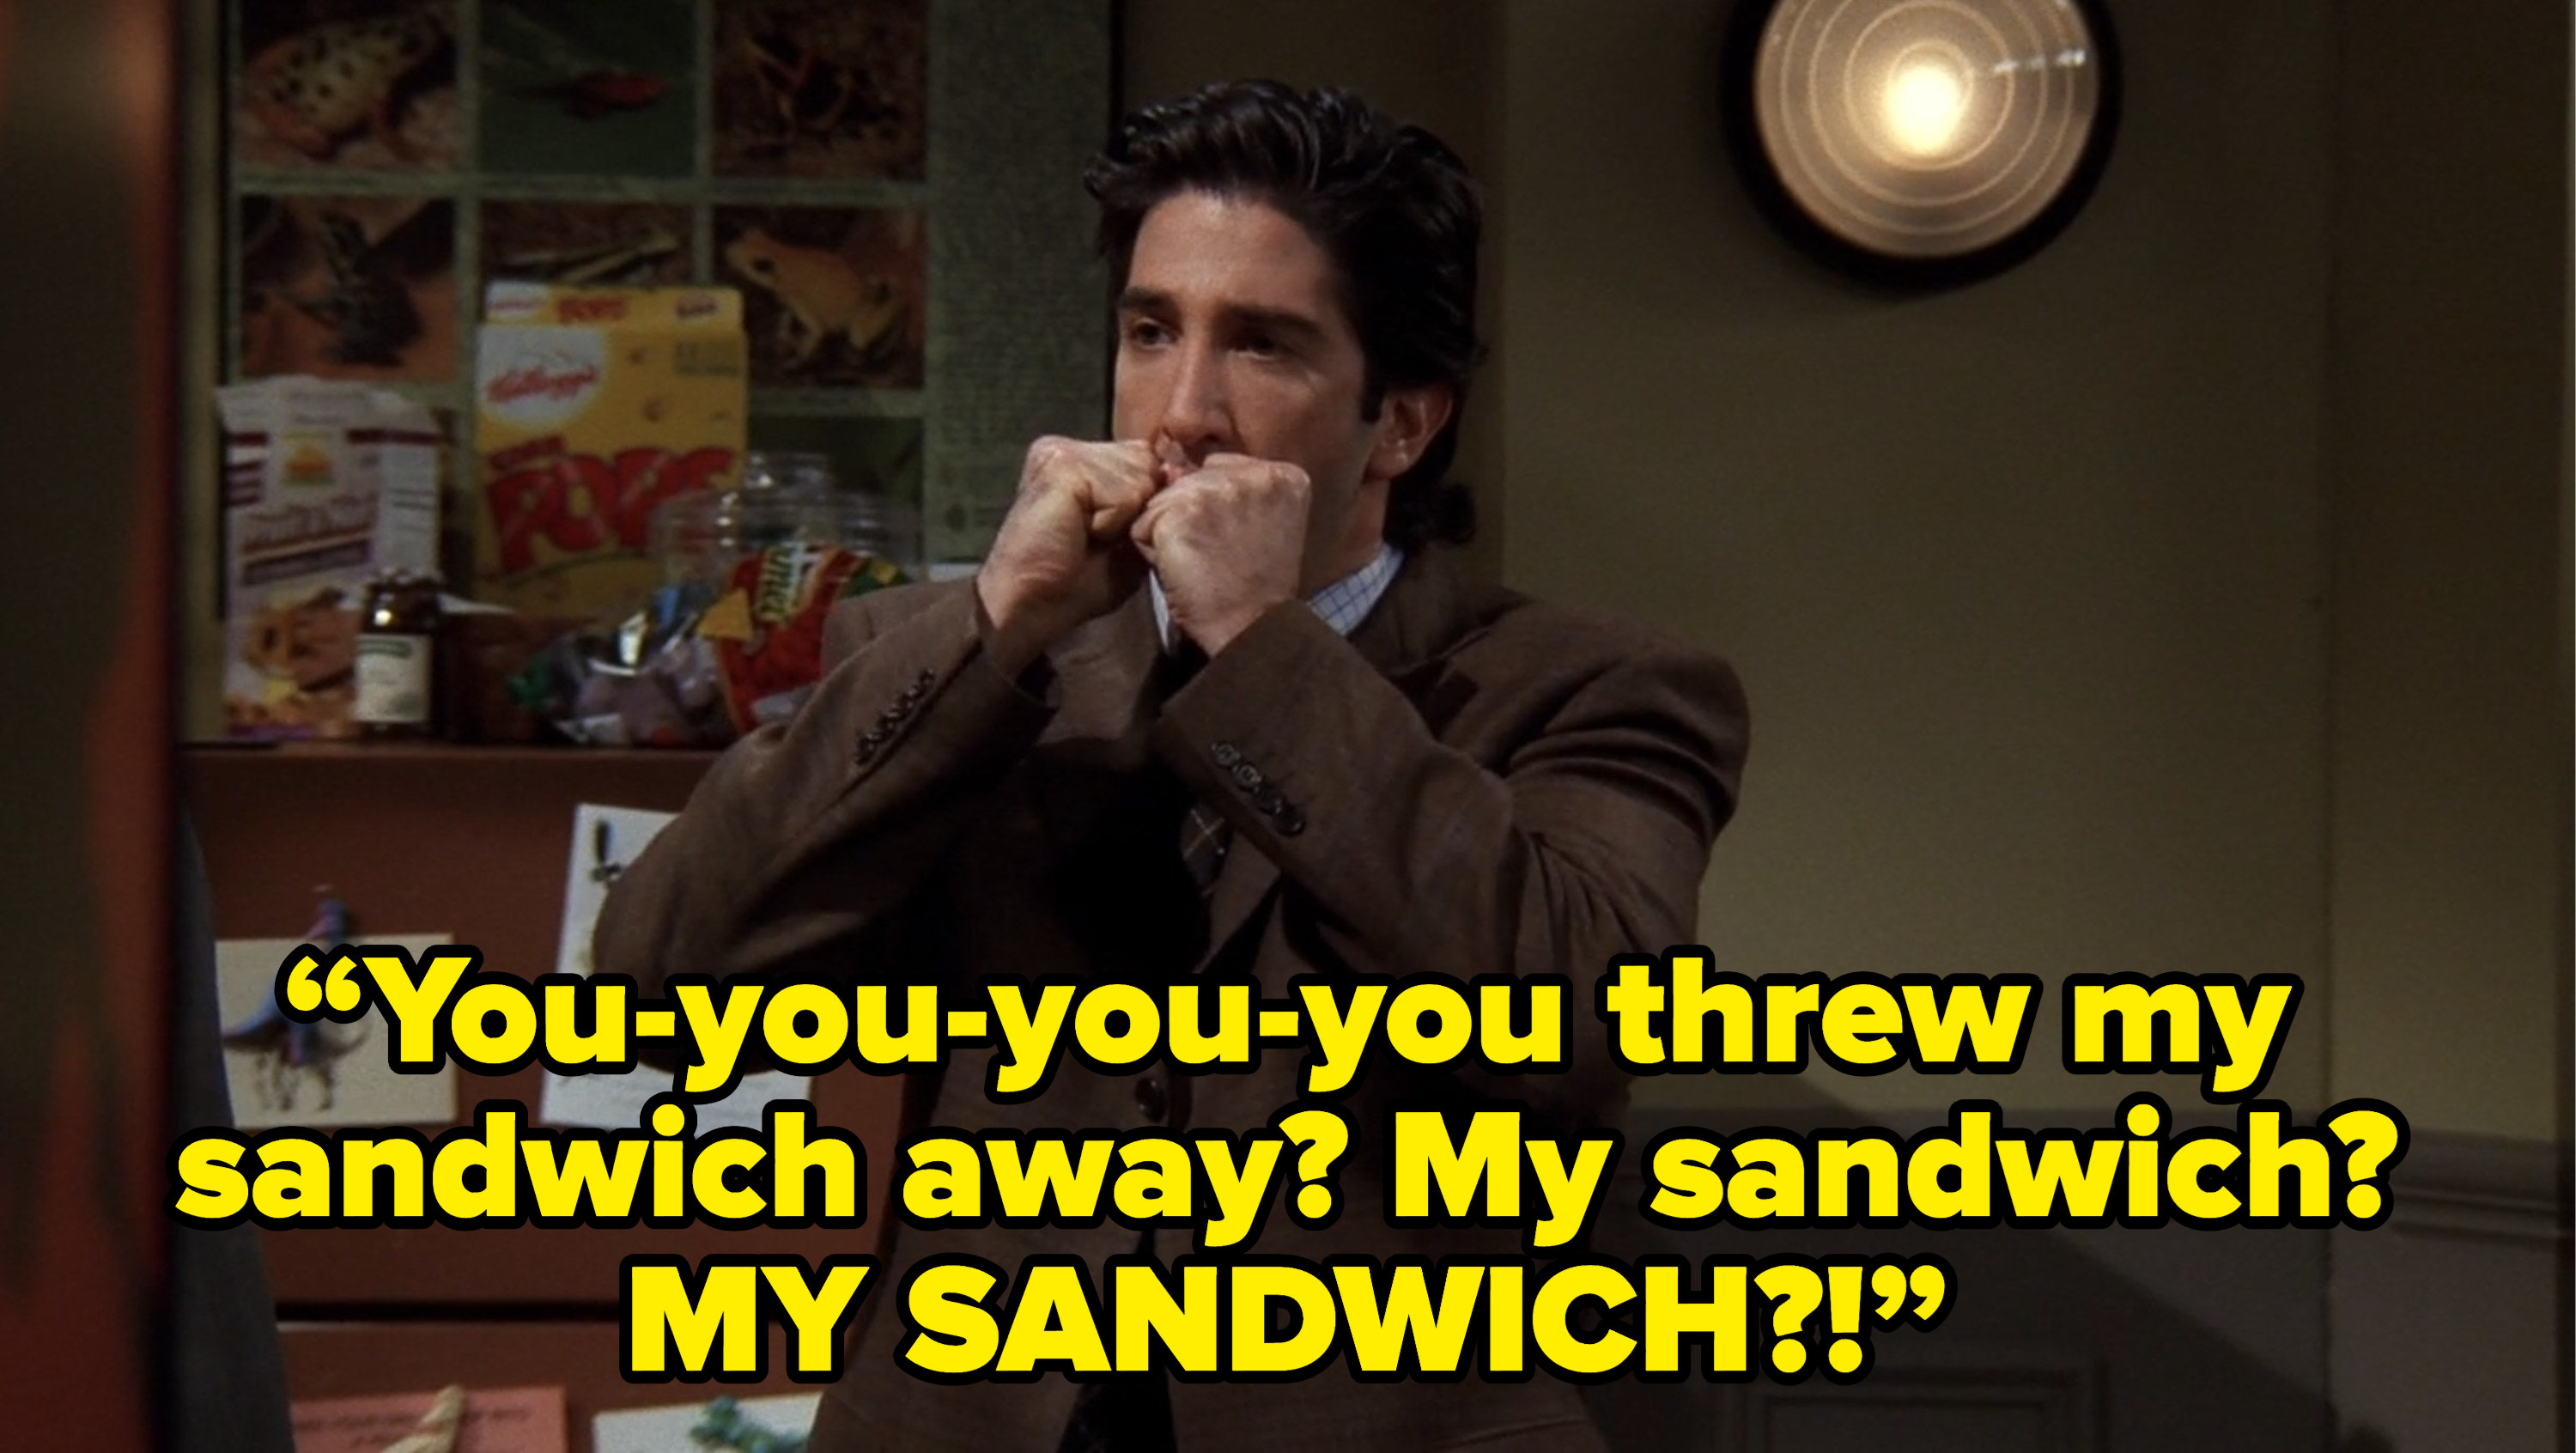 ross saying “You-you-you-you threw my sandwich away? My sandwich? MY SANDWICH?!” on friends